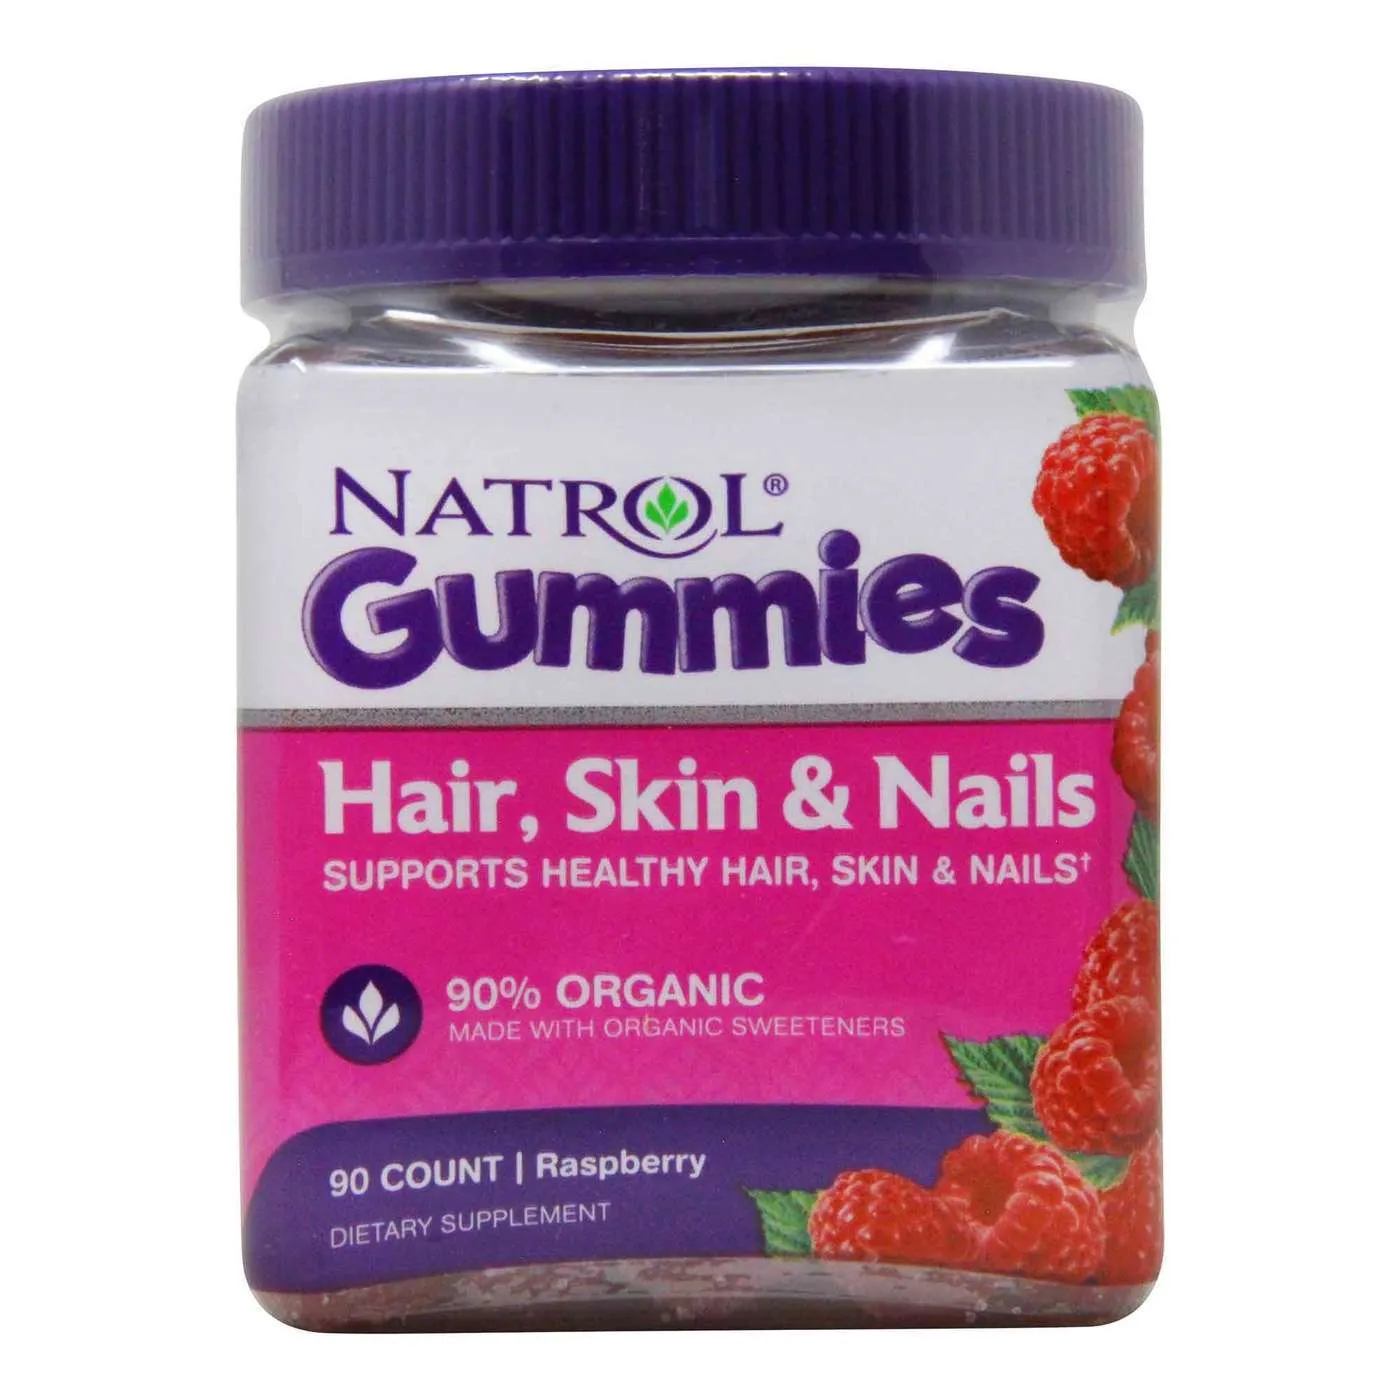 Natrol Hair, Skin & Nails Gummies 90 Gummies - low price, check reviews and  dosage